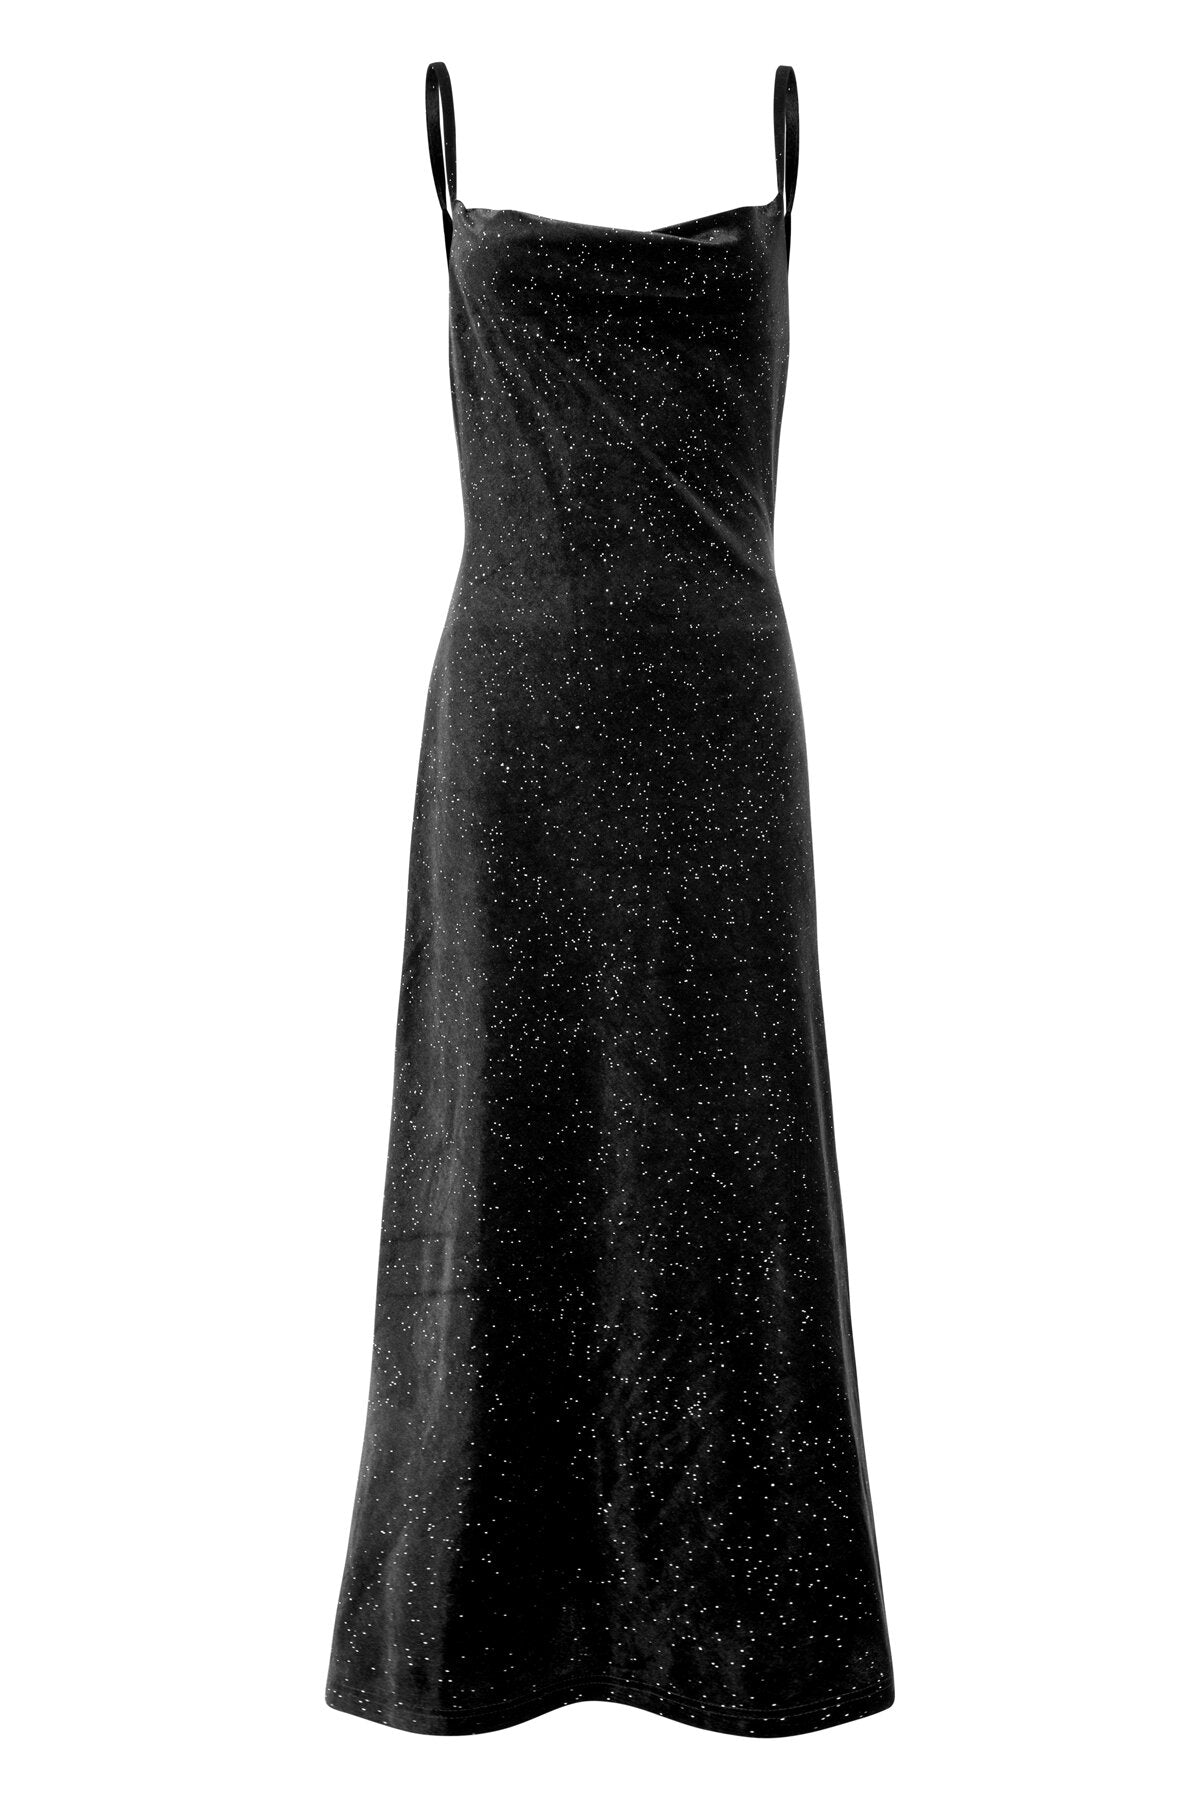 Coop - Do The Night Thing Dress - Black